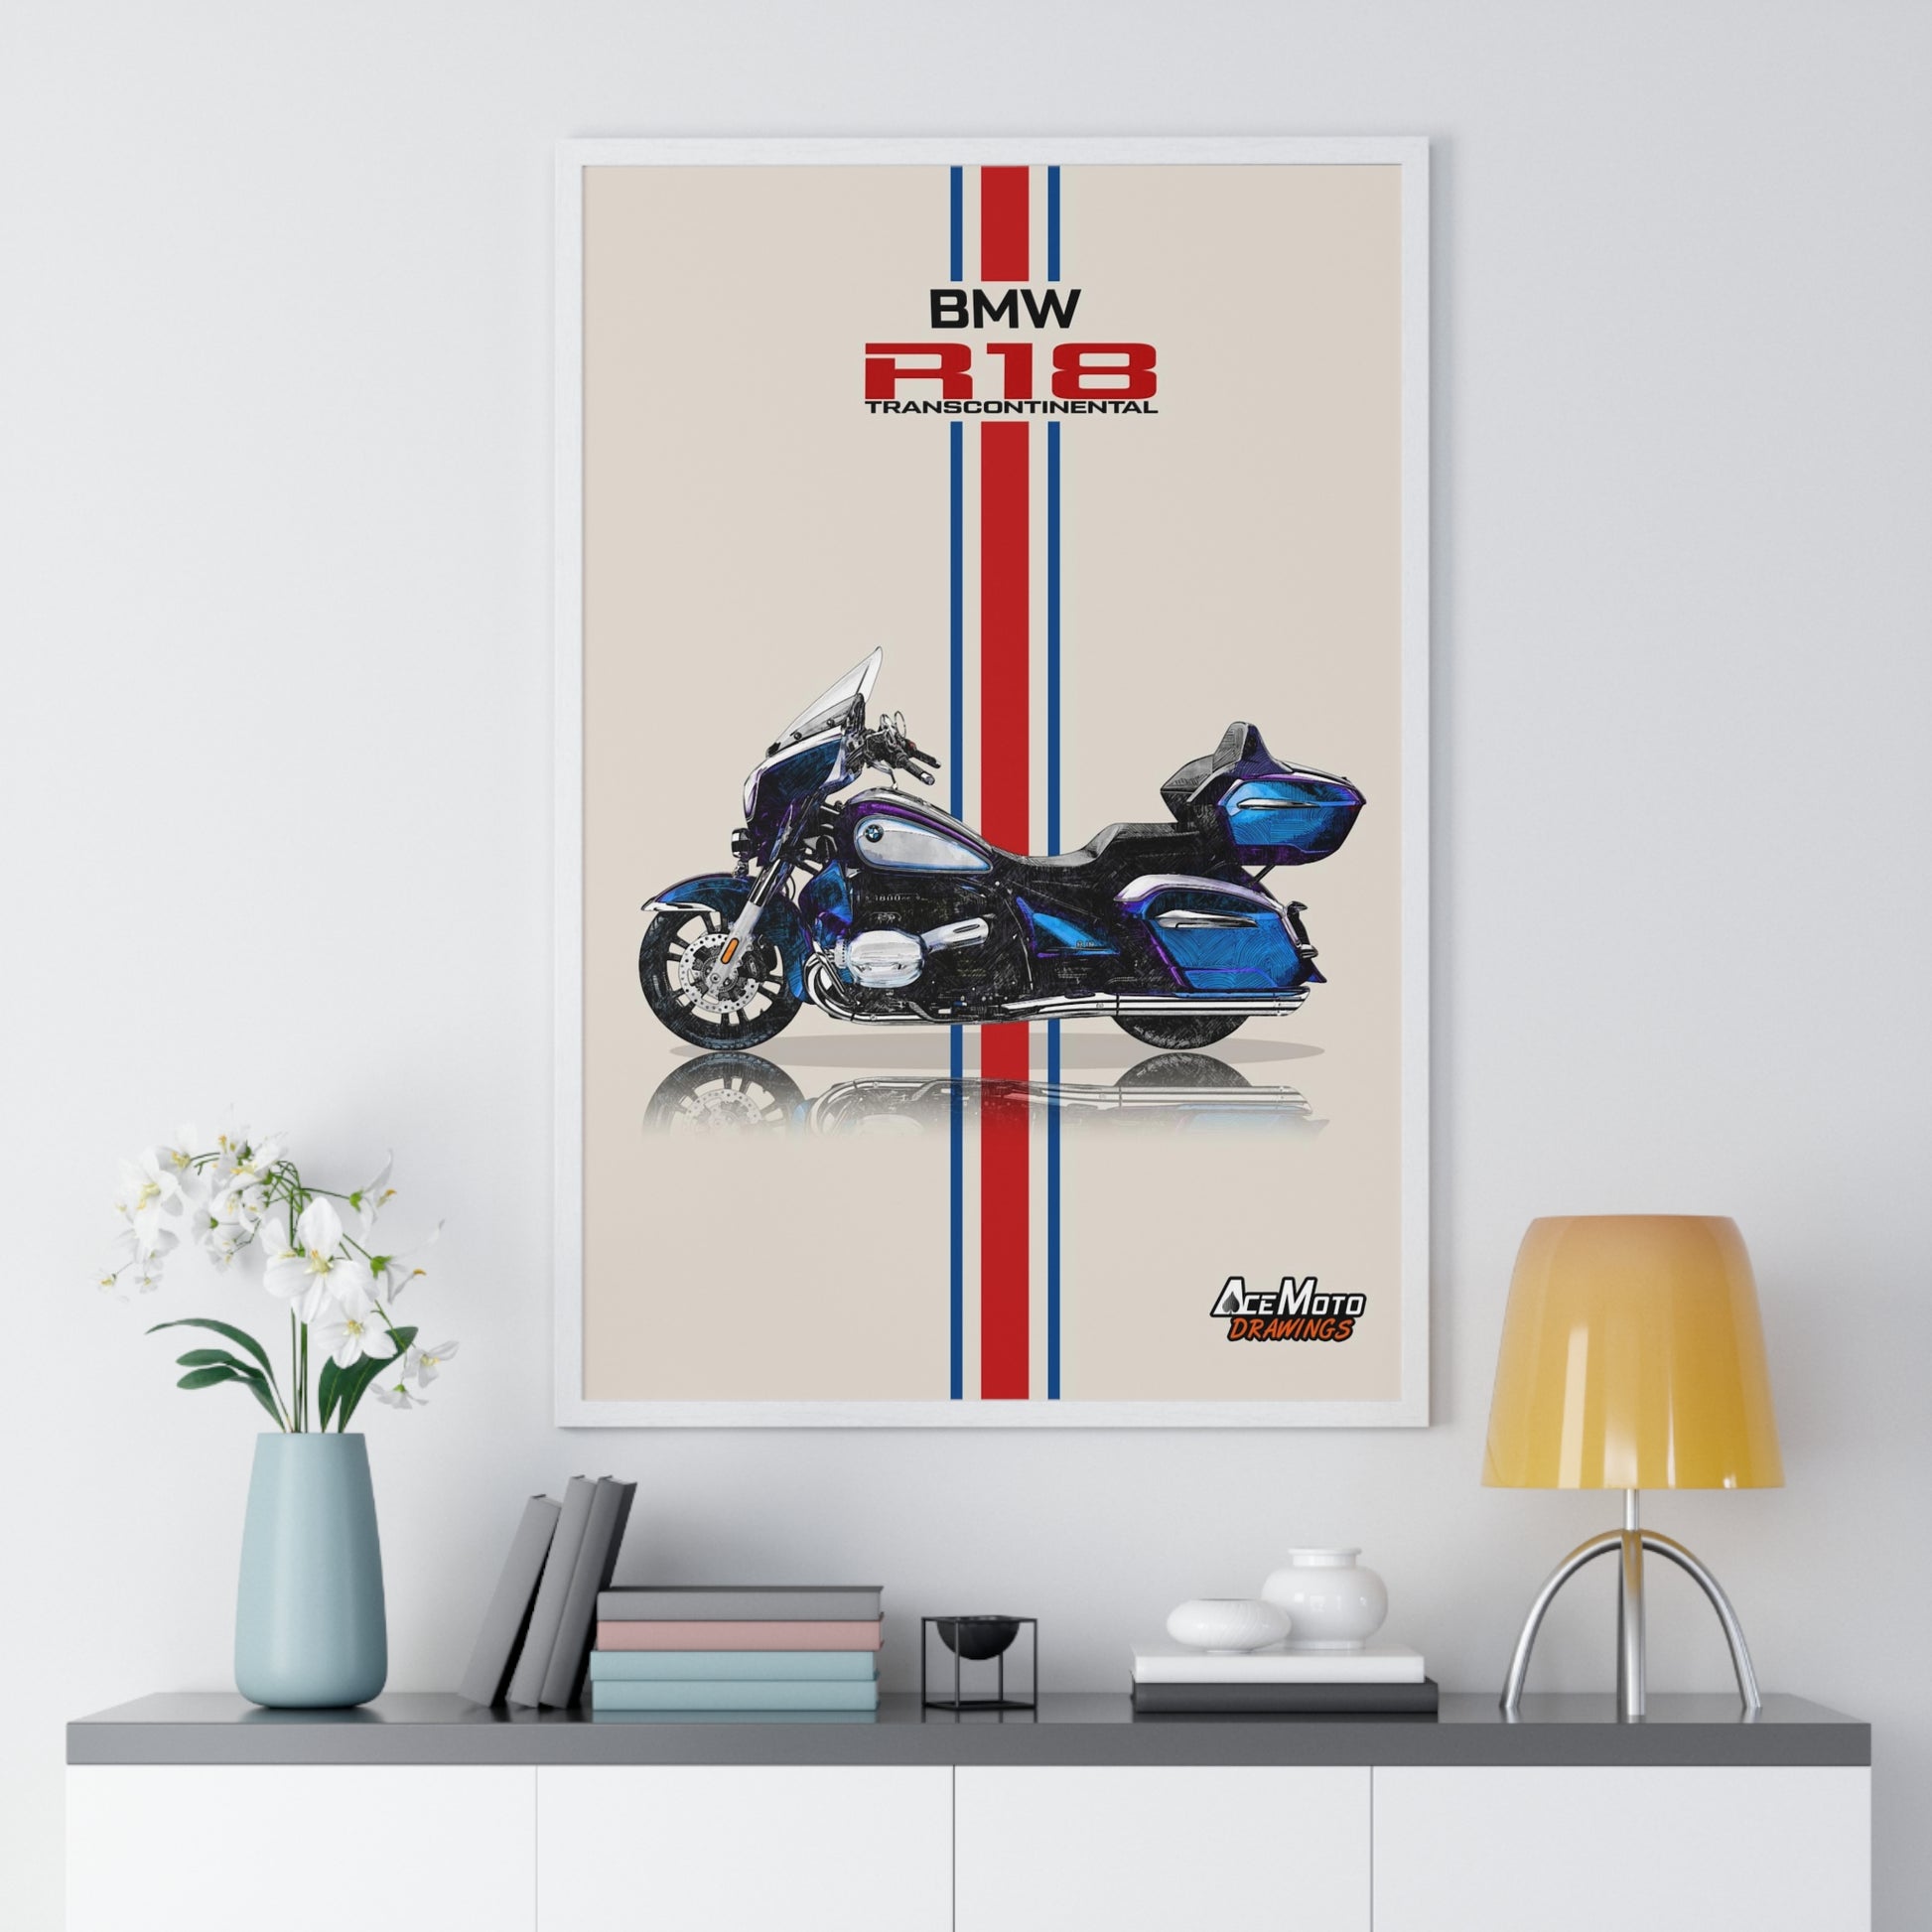 BMW R18 Transcontinental Drawing Poster  with White frame  angle 1 